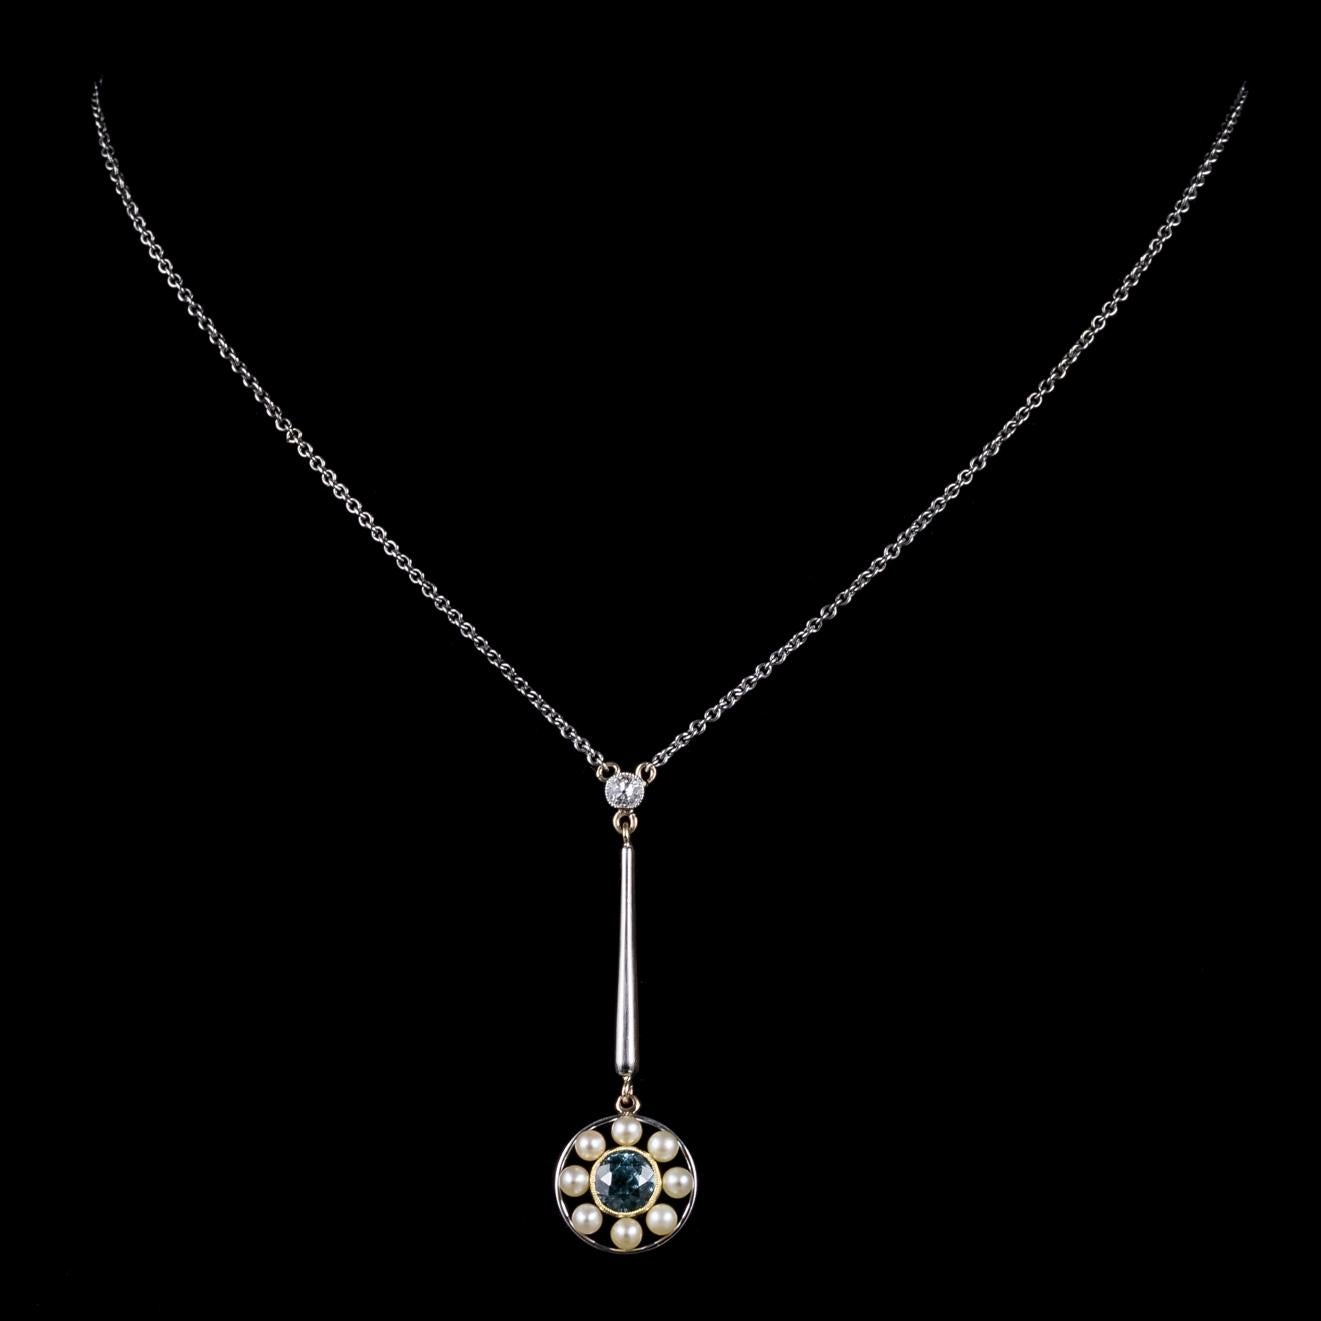 This fabulous antique Belle Epoque Lavaliere necklace is from the Edwardian era, Circa 1910.  

The Belle Époque, or the ‘Beautiful era’ spanned three distinct jewellery periods from 1890 -1915. This was a time of increasing wealth and flourishing